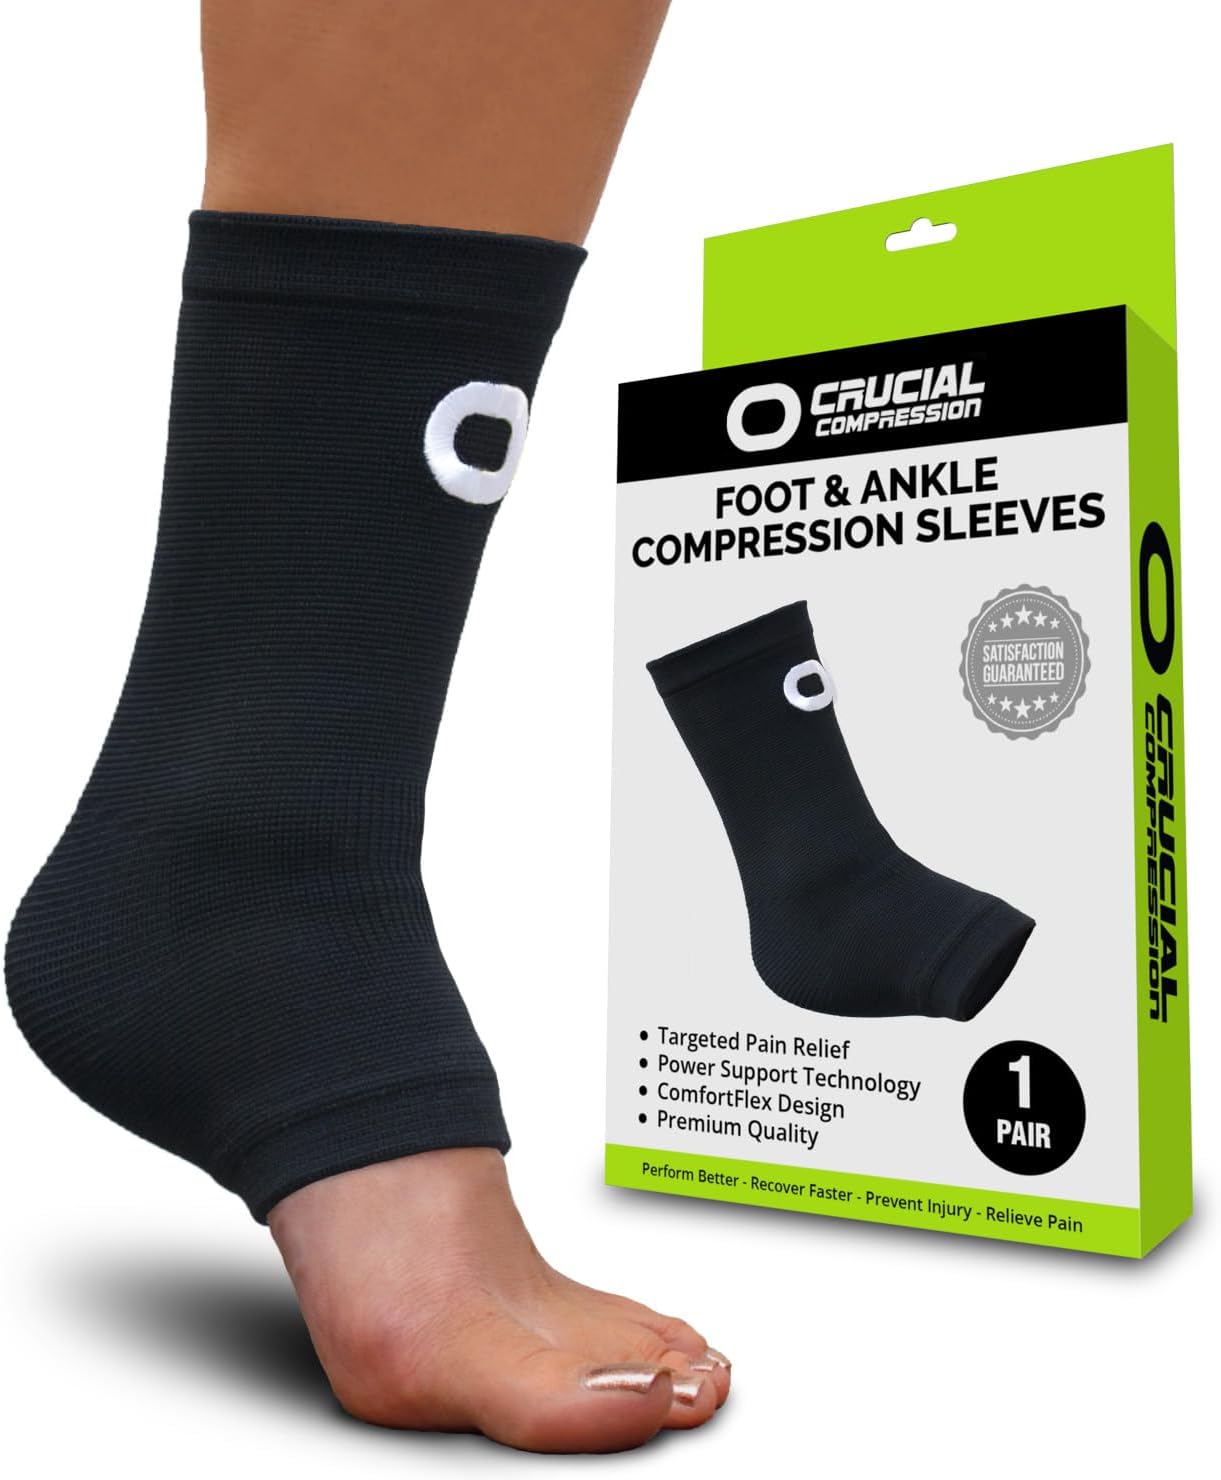 Ankle Brace Compression Support Sleeve (1 Pair) - Best Ankle Compression Socks For Plantar Fasciitis, Arch Support, Foot  Ankle Swelling, Achilles Tendon, Joint Pain, Injury Recovery, Heel Spurs